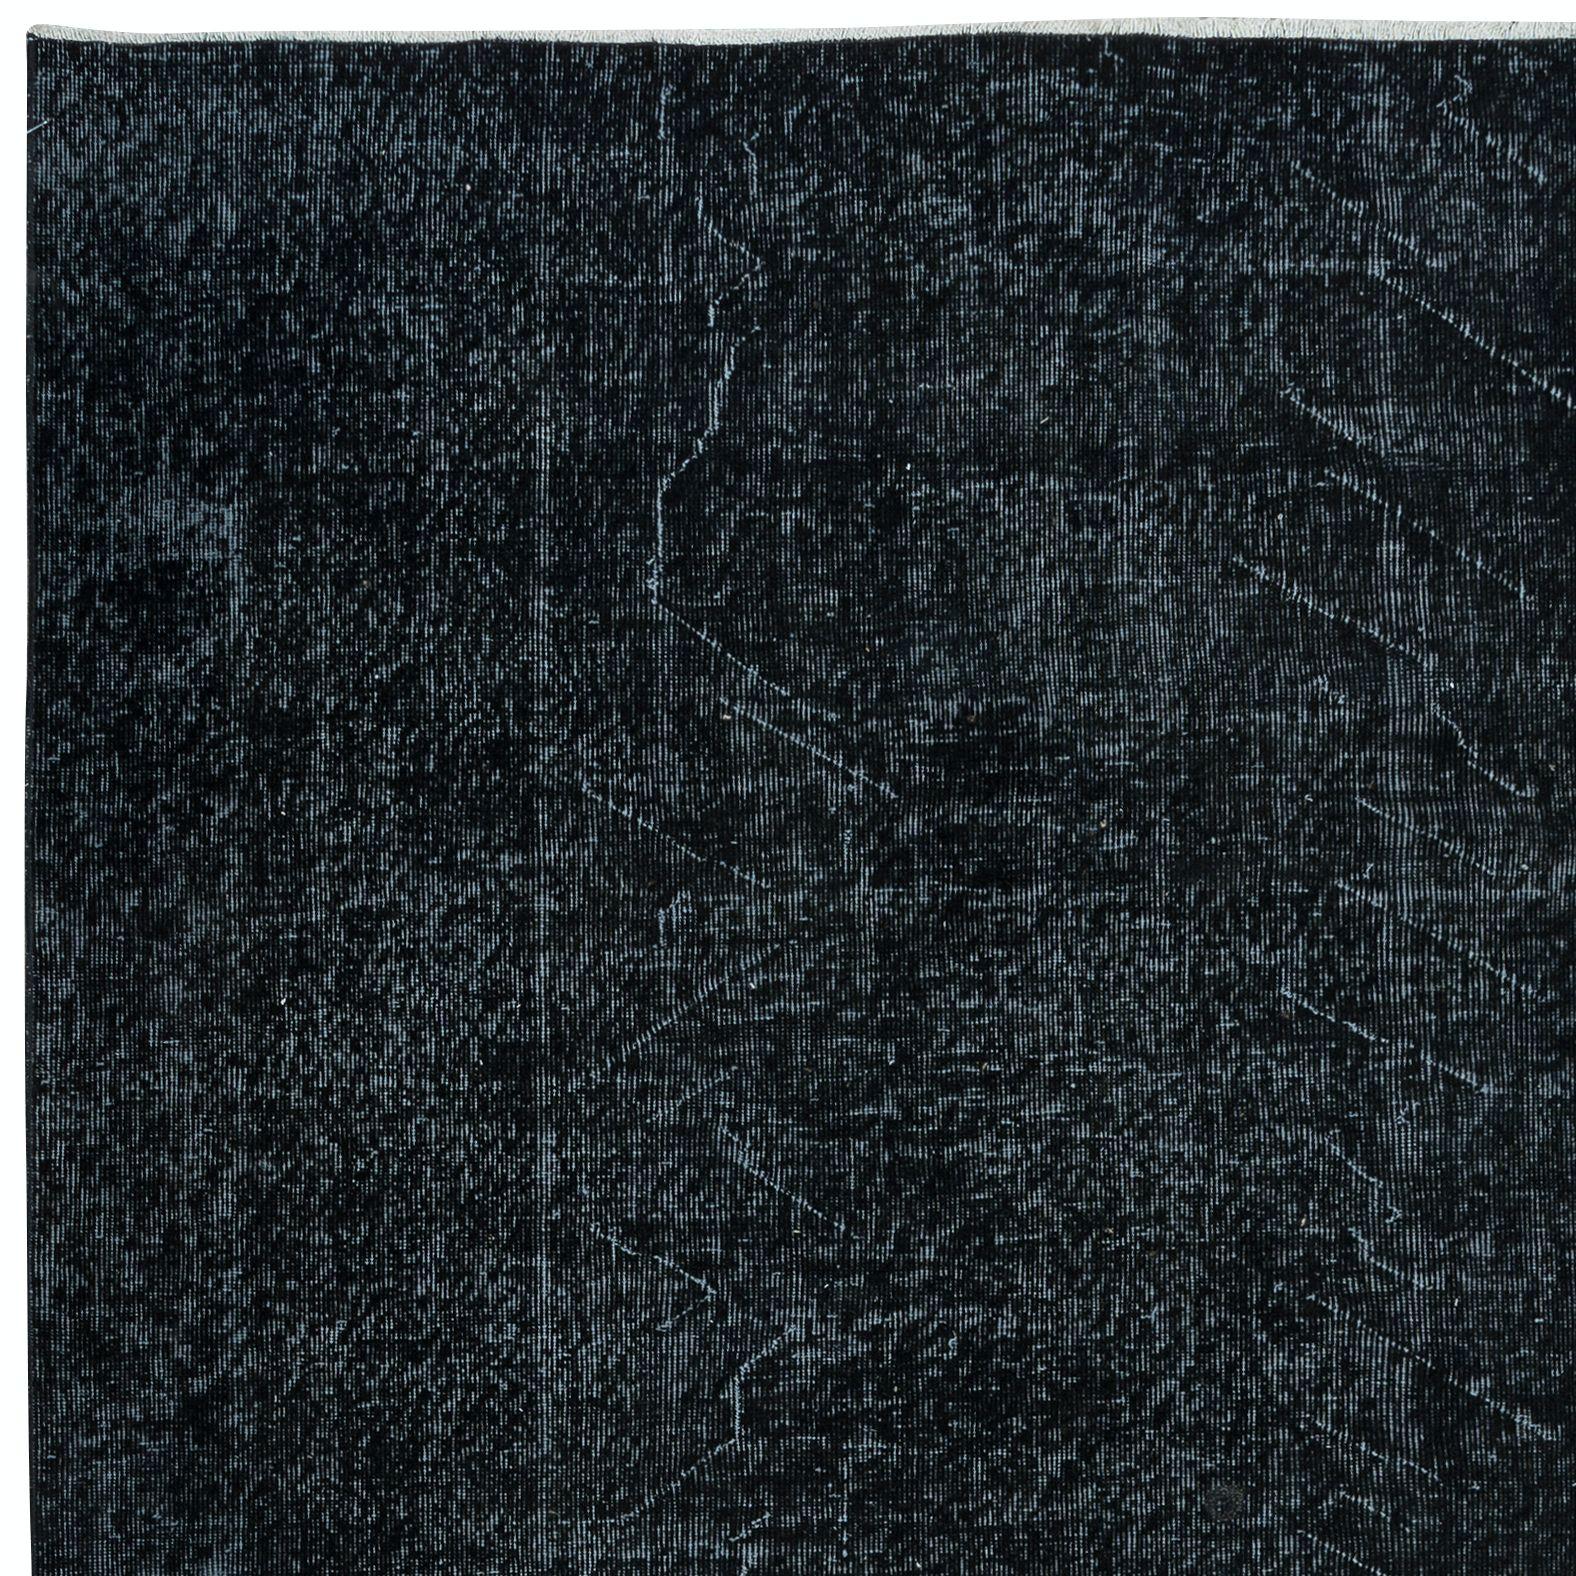 Turkish 6.4x9 Ft Plain Black Area Rug, Handknotted and Handwoven in Isparta, Turkey For Sale